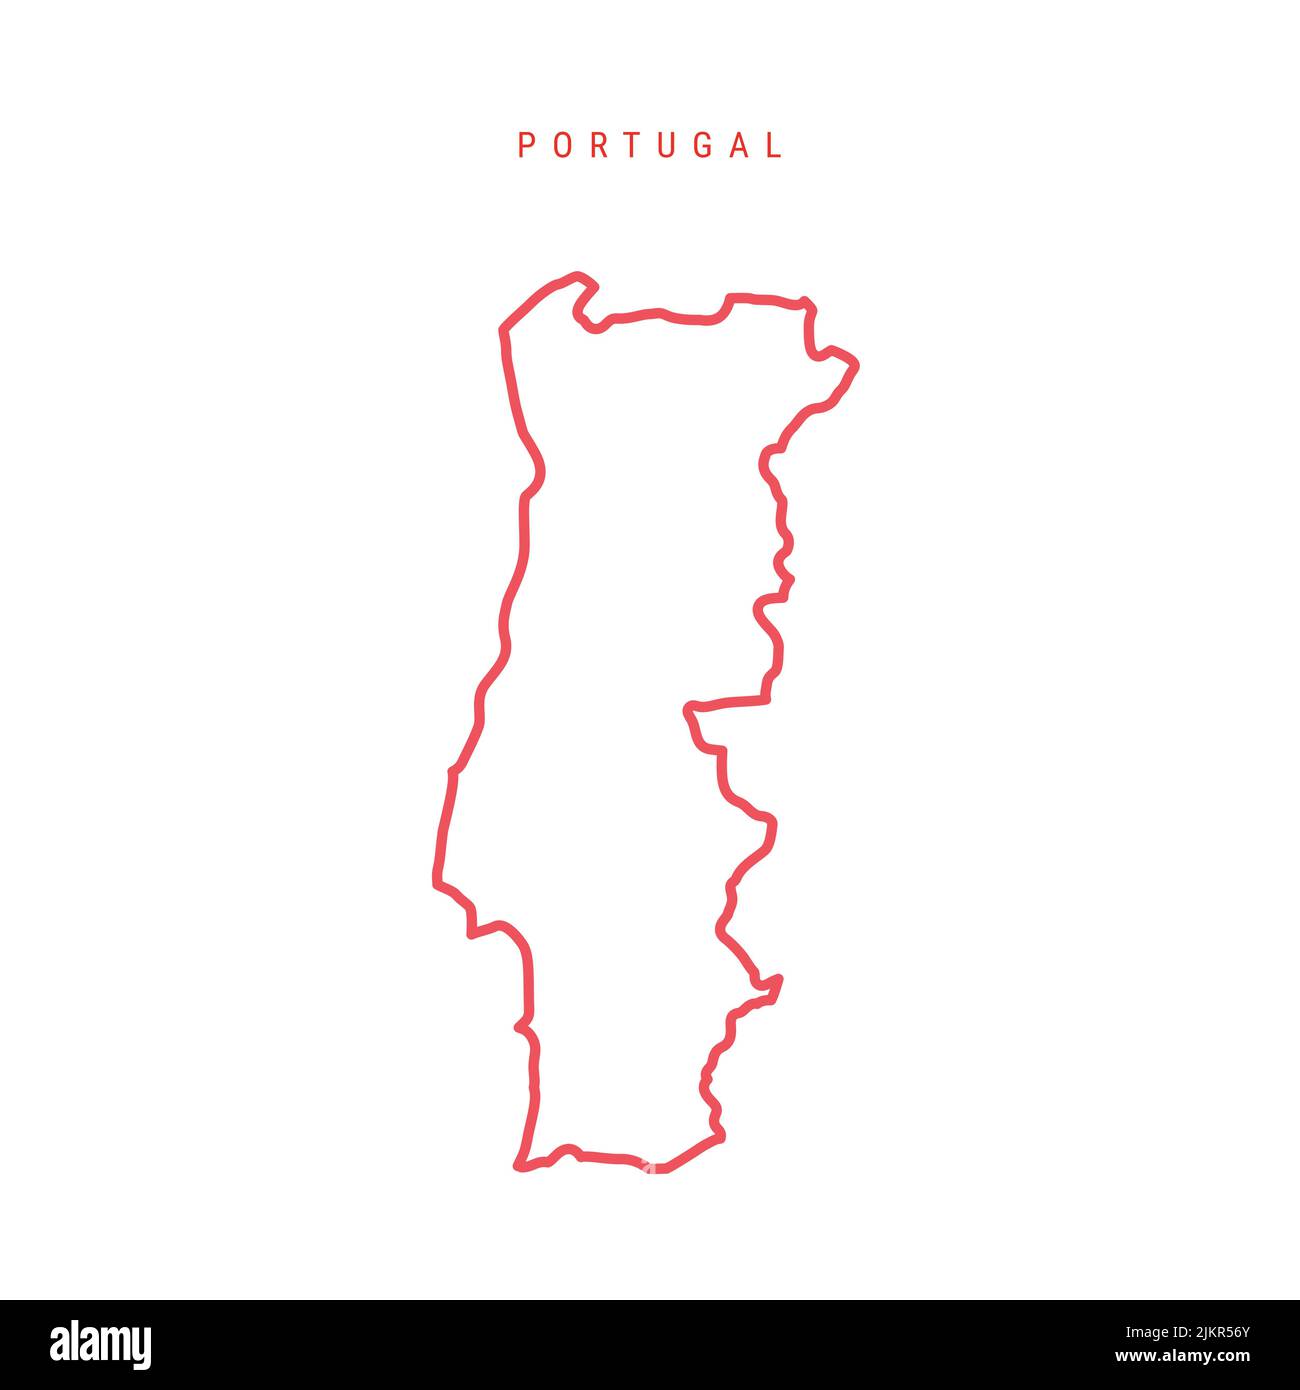 Portugal editable outline map. Portuguese red border. Country name. Adjust line weight. Change to any color. Vector illustration. Stock Vector